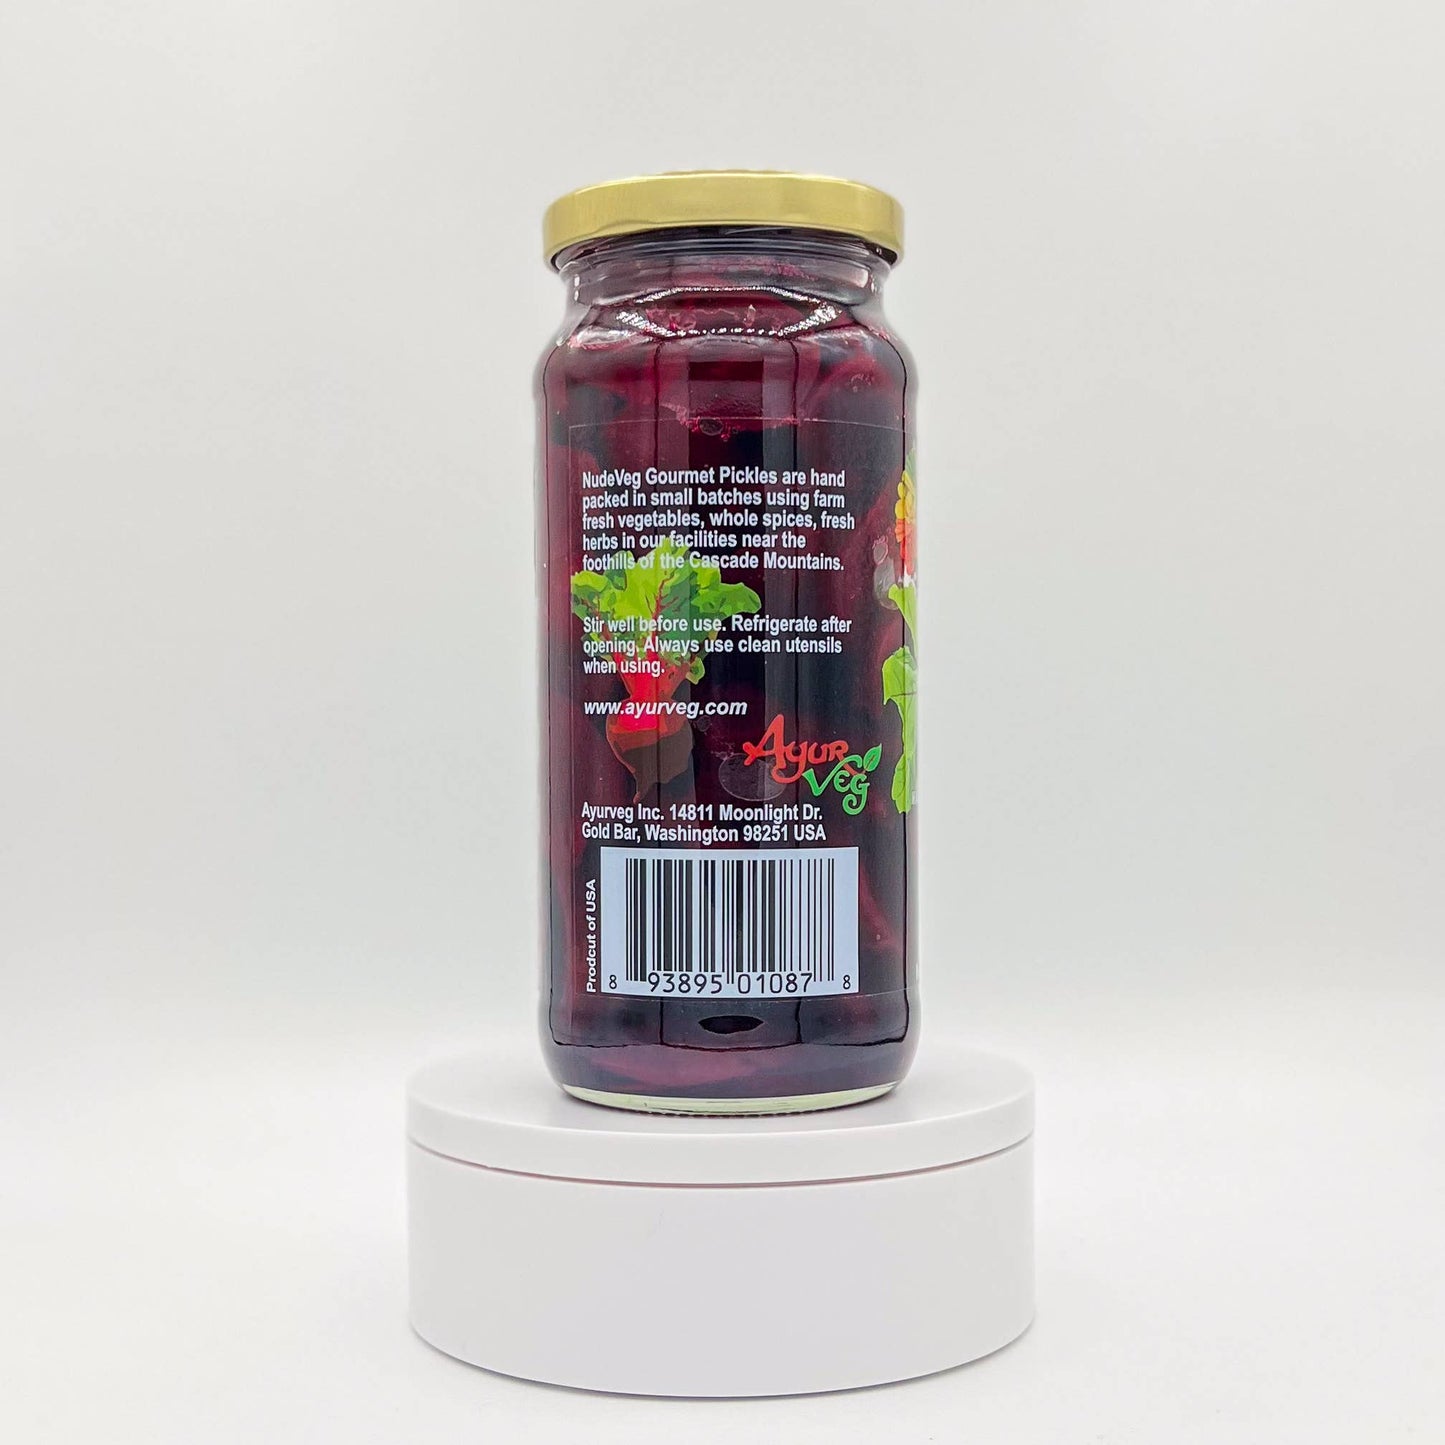 Handcrafted Pickled Beets